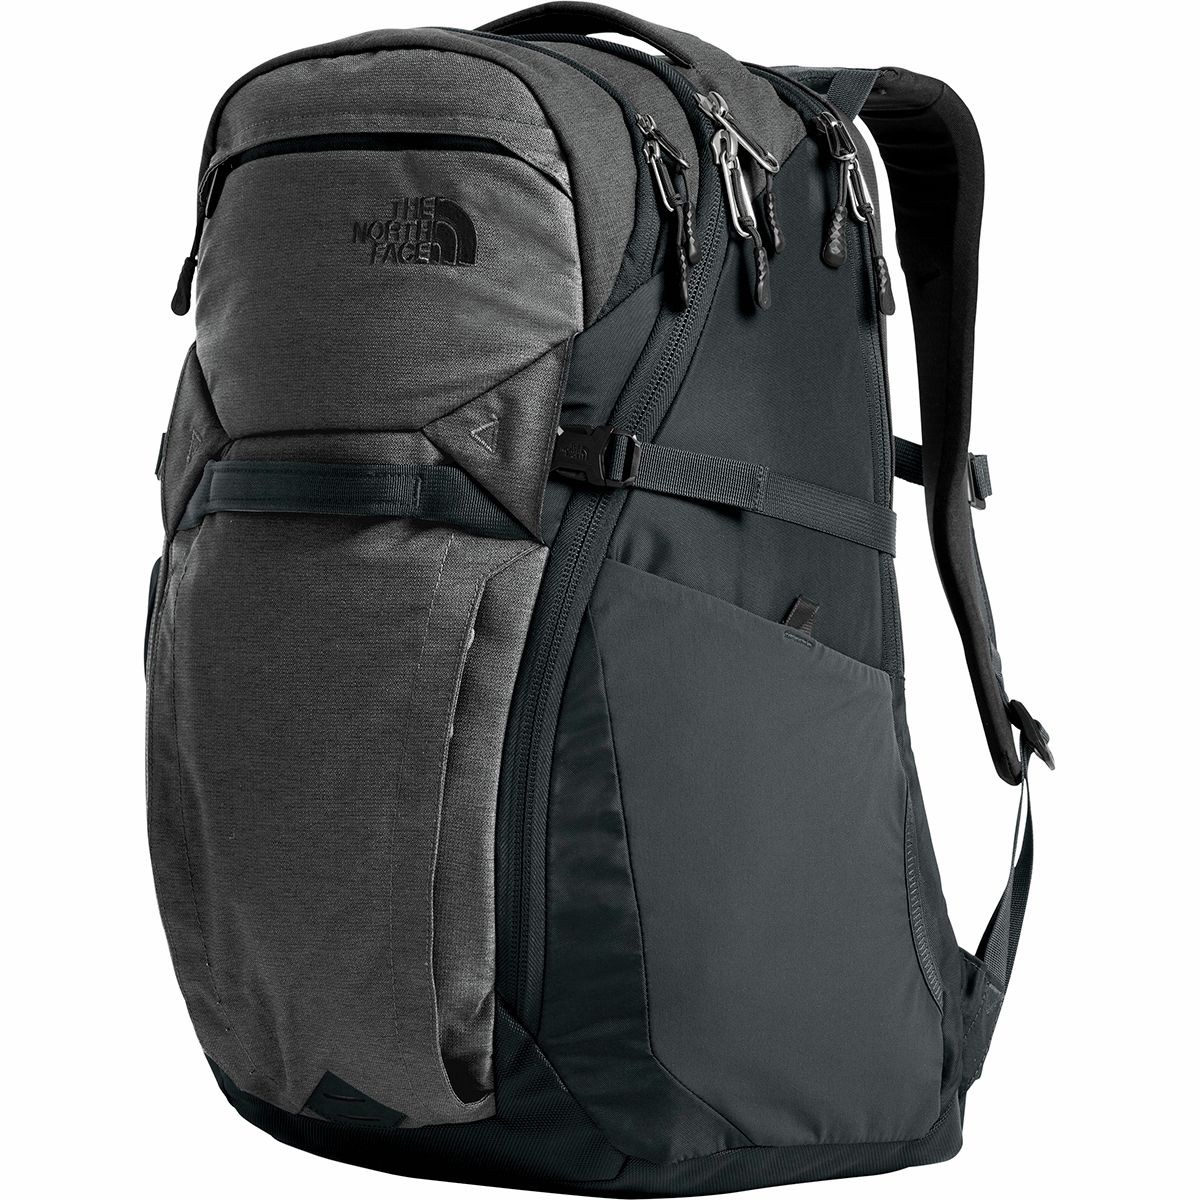 north face bags ireland